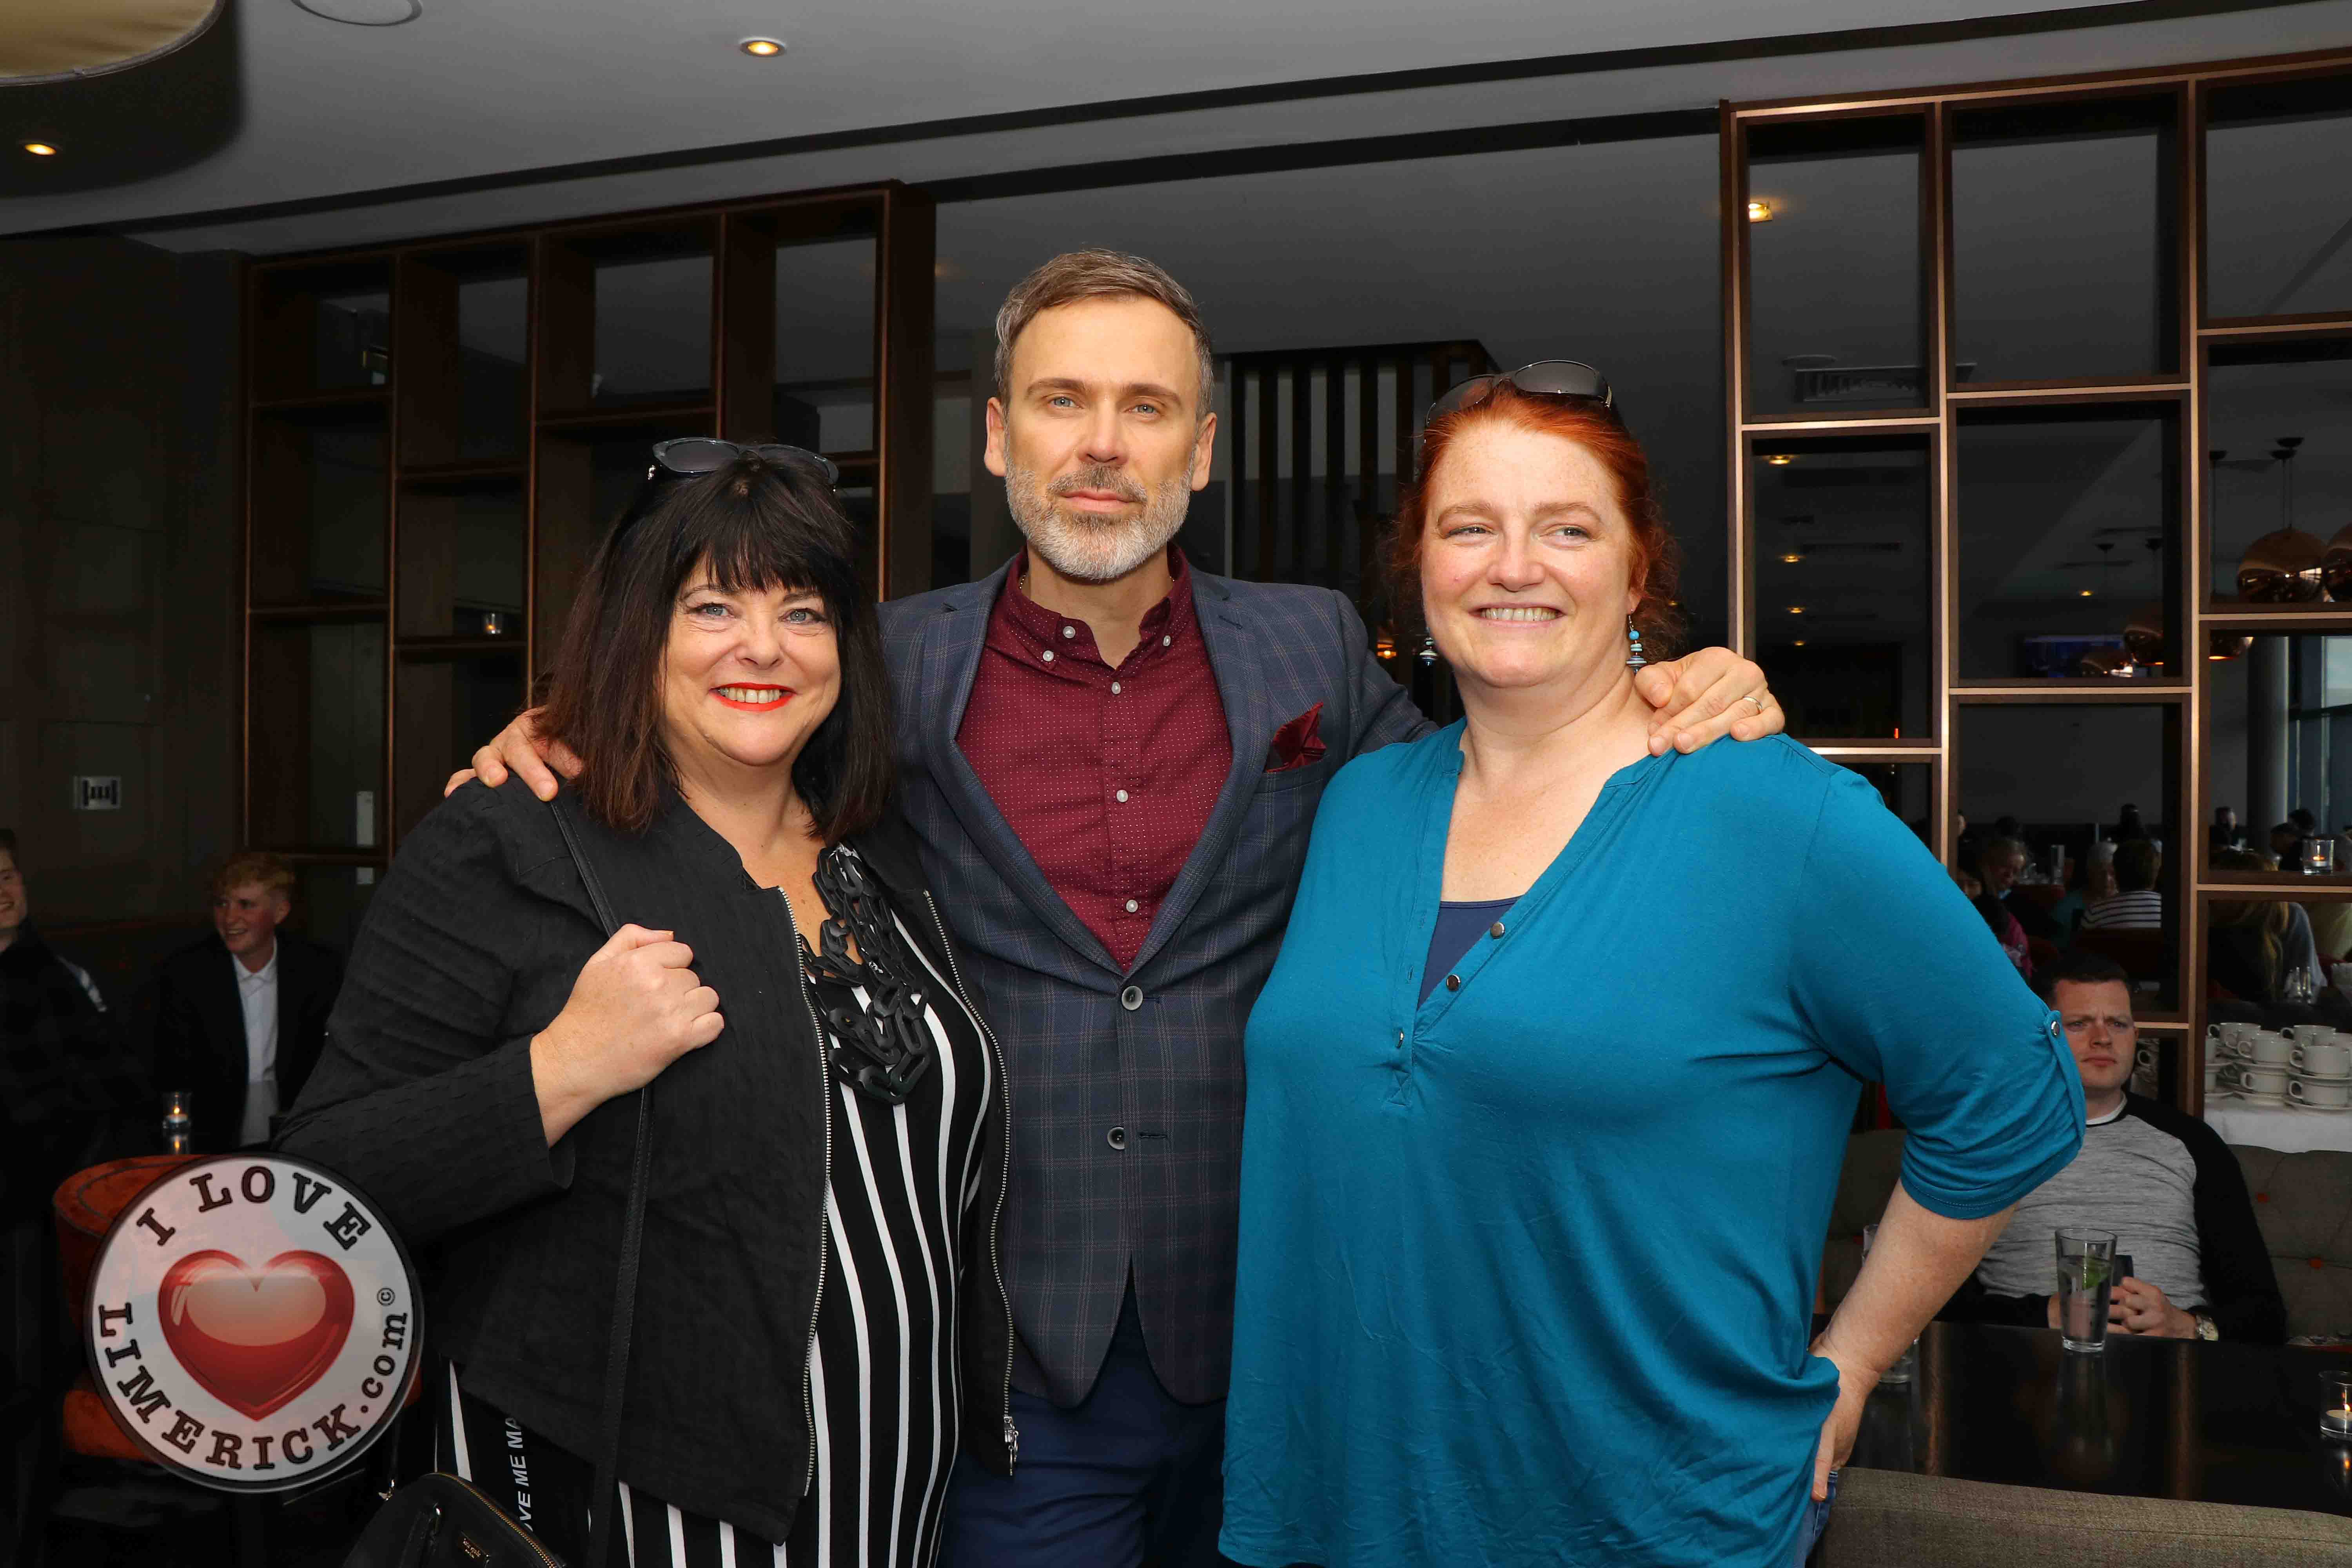 Pictured at the Limerick Pride 2019 Press Launch at the Clayton Hotel are Valerie Dolan, Dock Road, Richard Lynch, I Love Limerick and Orla Clancy, Ballingarry. Picture: Orla McLaughlin/ilovelimerick.